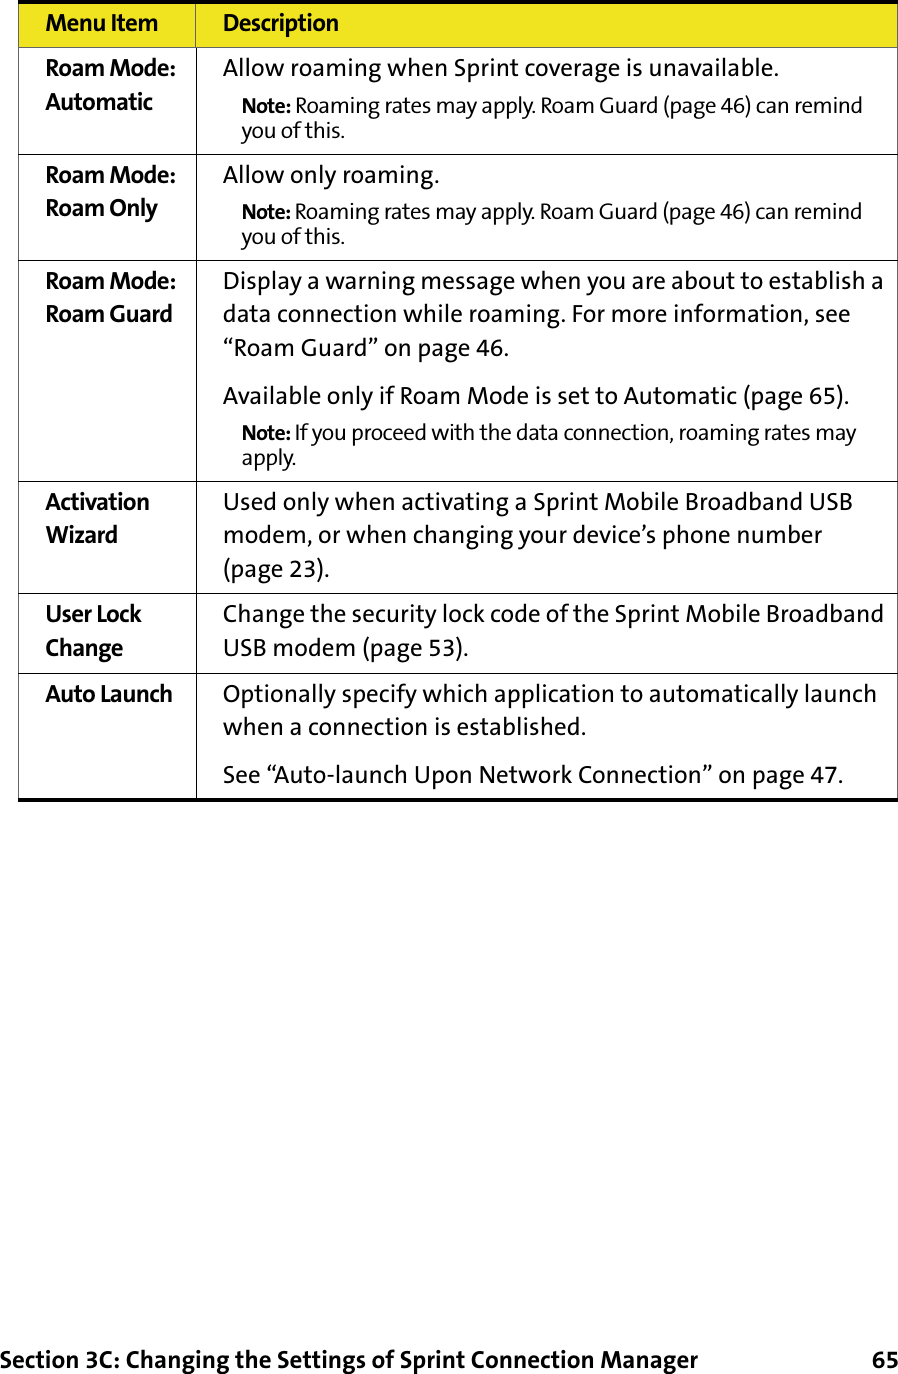 Section 3C: Changing the Settings of Sprint Connection Manager      65Roam Mode: AutomaticAllow roaming when Sprint coverage is unavailable.Note: Roaming rates may apply. Roam Guard (page 46) can remind you of this.Roam Mode: Roam OnlyAllow only roaming.Note: Roaming rates may apply. Roam Guard (page 46) can remind you of this.Roam Mode: Roam GuardDisplay a warning message when you are about to establish a data connection while roaming. For more information, see “Roam Guard” on page 46.Available only if Roam Mode is set to Automatic (page 65).Note: If you proceed with the data connection, roaming rates may apply.Activation WizardUsed only when activating a Sprint Mobile Broadband USB modem, or when changing your device’s phone number (page 23).User Lock ChangeChange the security lock code of the Sprint Mobile Broadband USB modem (page 53).Auto Launch Optionally specify which application to automatically launch when a connection is established.See “Auto-launch Upon Network Connection” on page 47.Menu Item Description